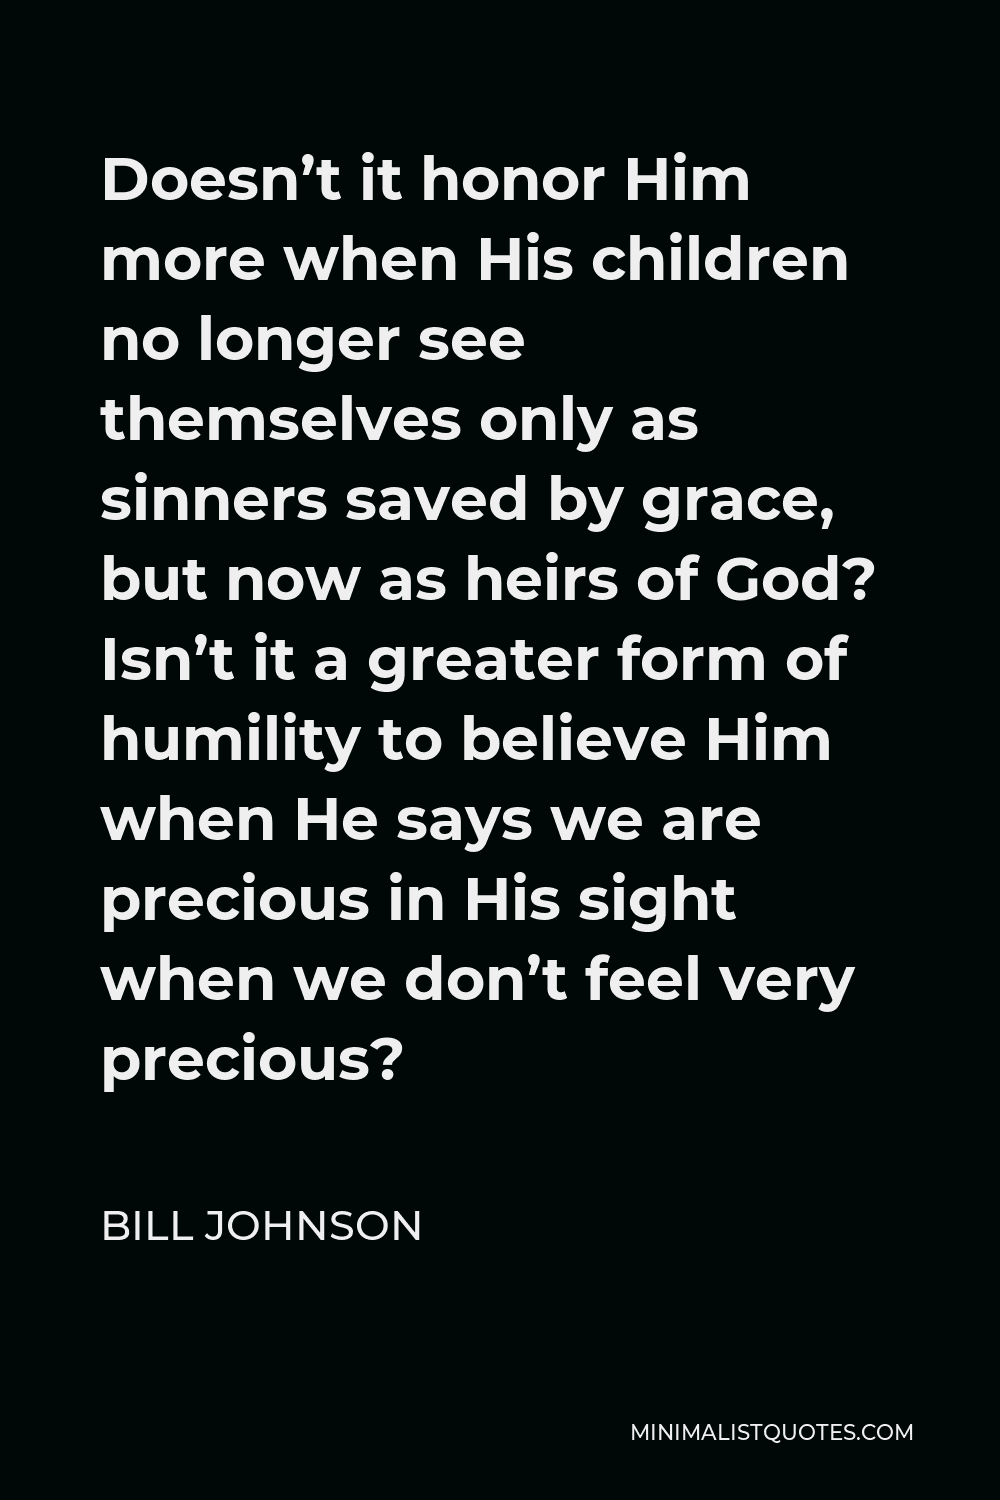 Bill Johnson Quote - Doesn’t it honor Him more when His children no longer see themselves only as sinners saved by grace, but now as heirs of God? Isn’t it a greater form of humility to believe Him when He says we are precious in His sight when we don’t feel very precious?